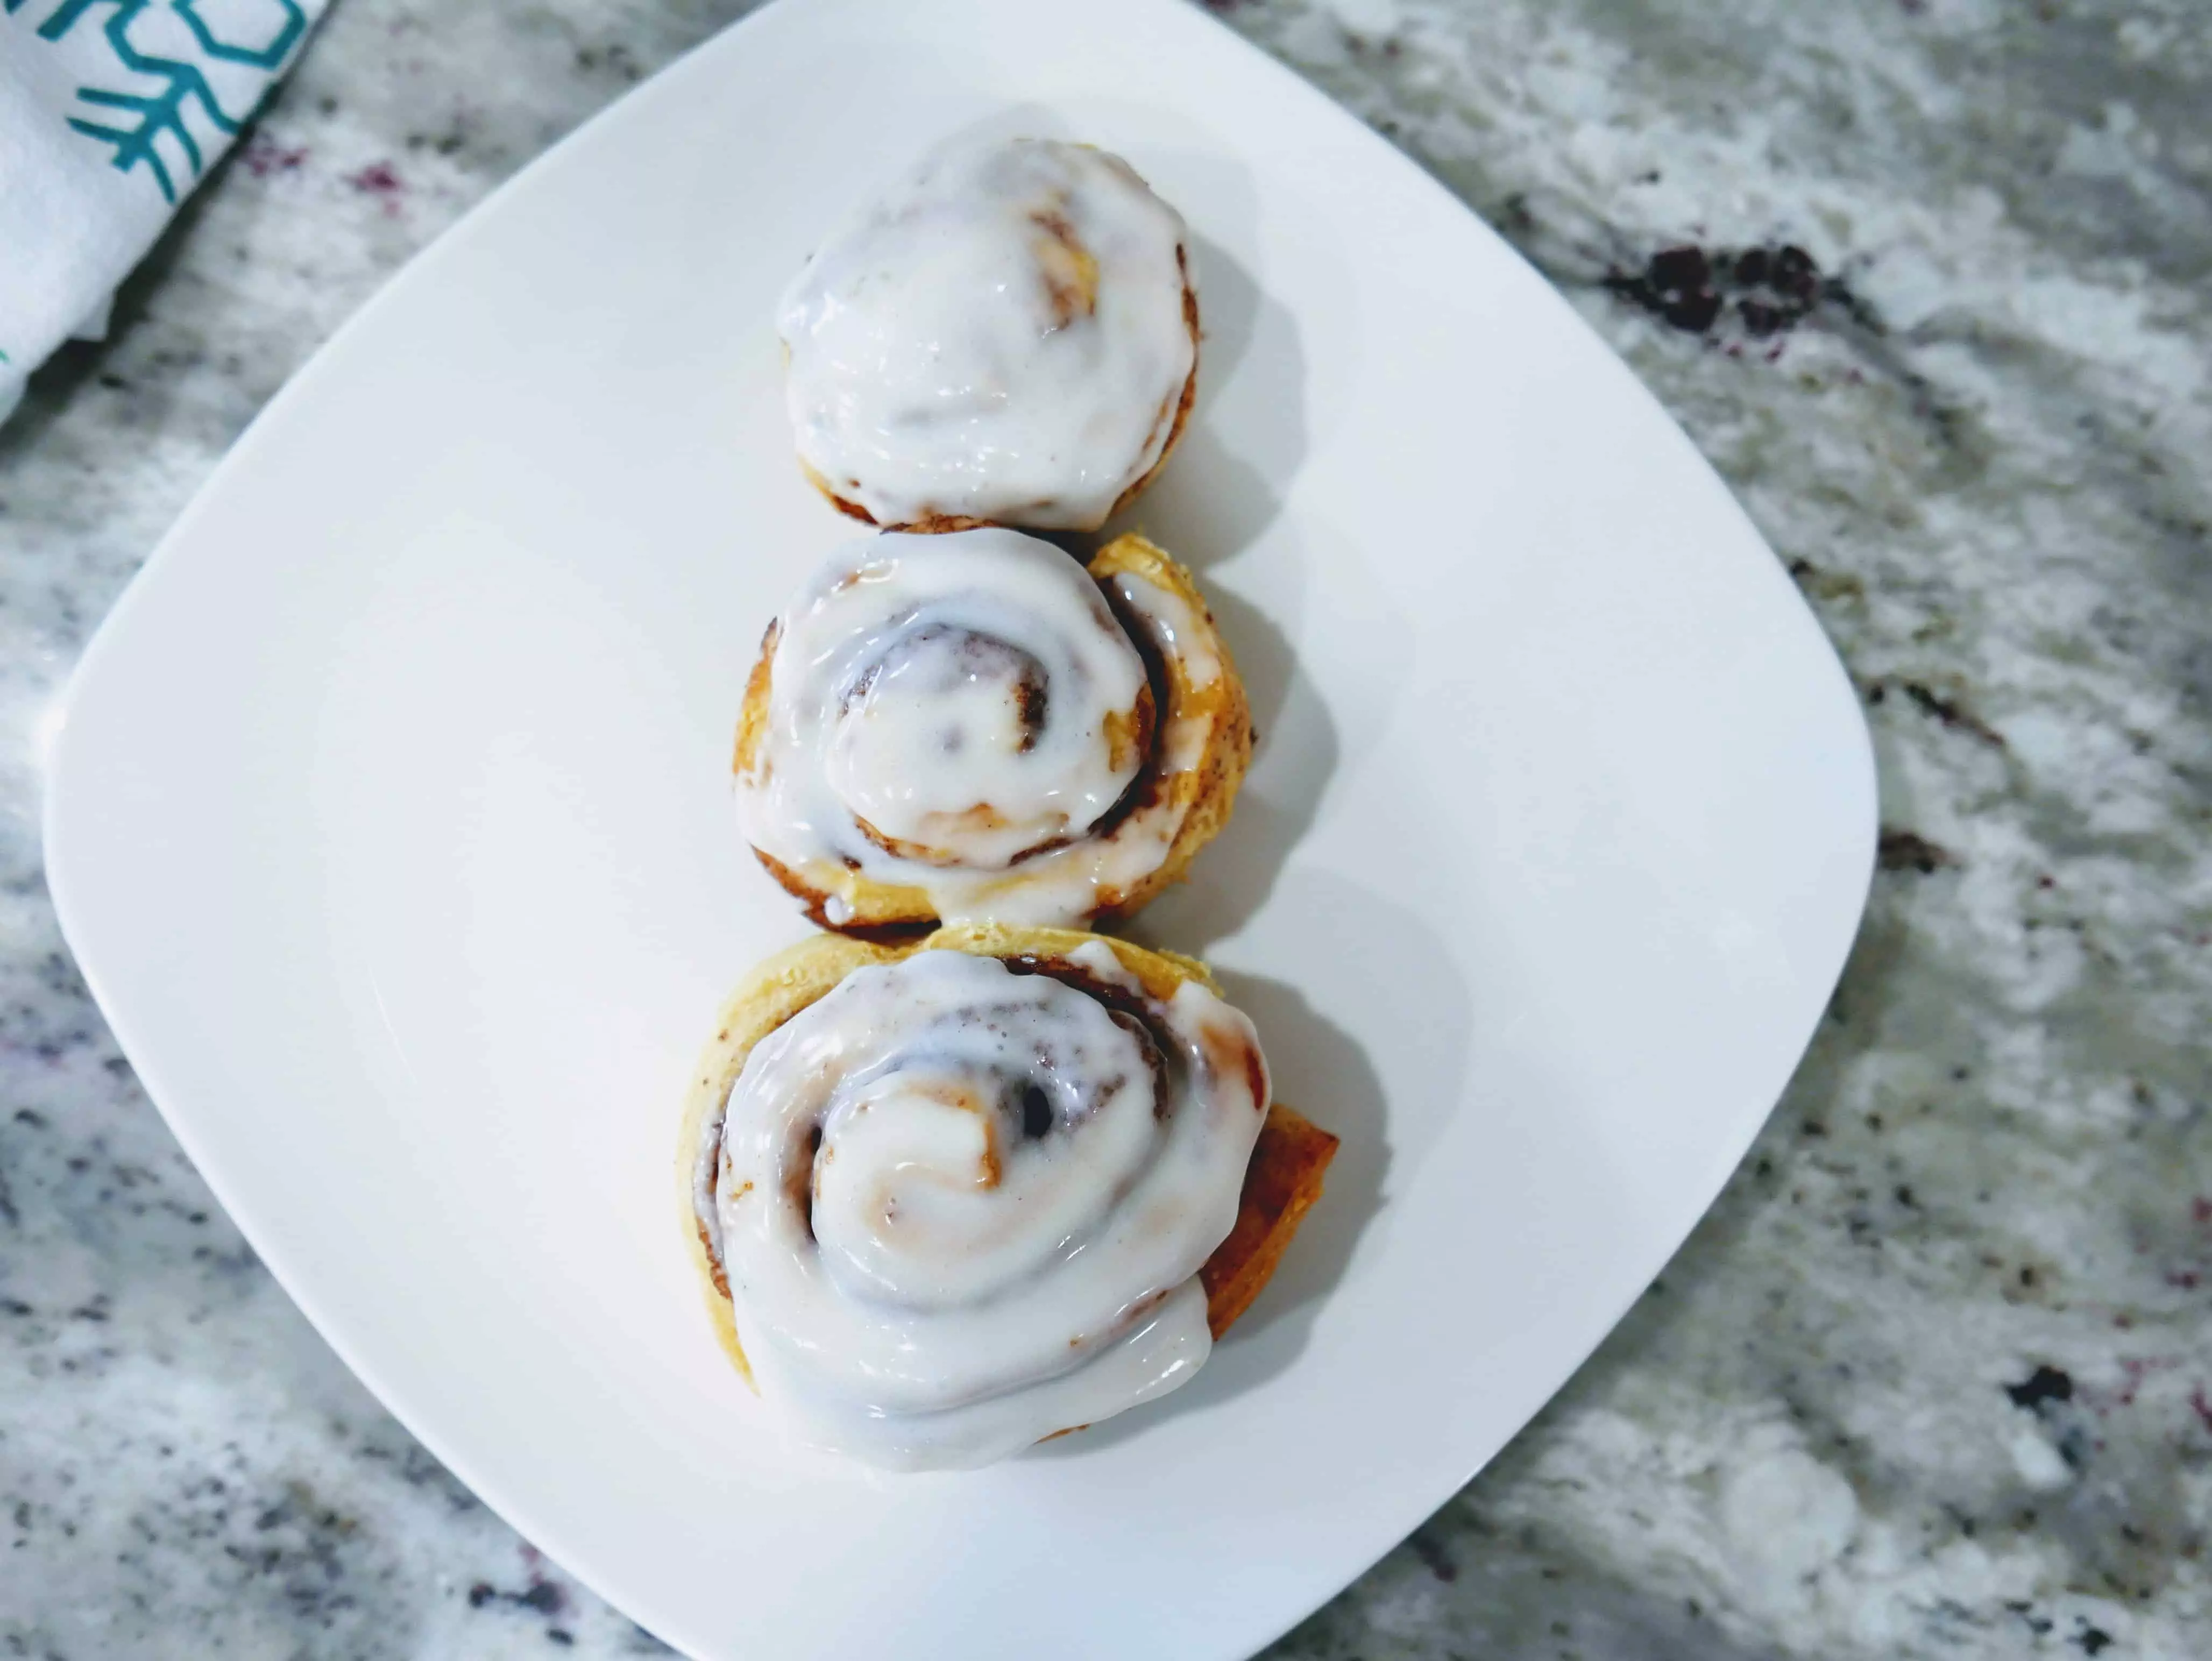 cinnamon rolls assembled like a snowman with icing on top